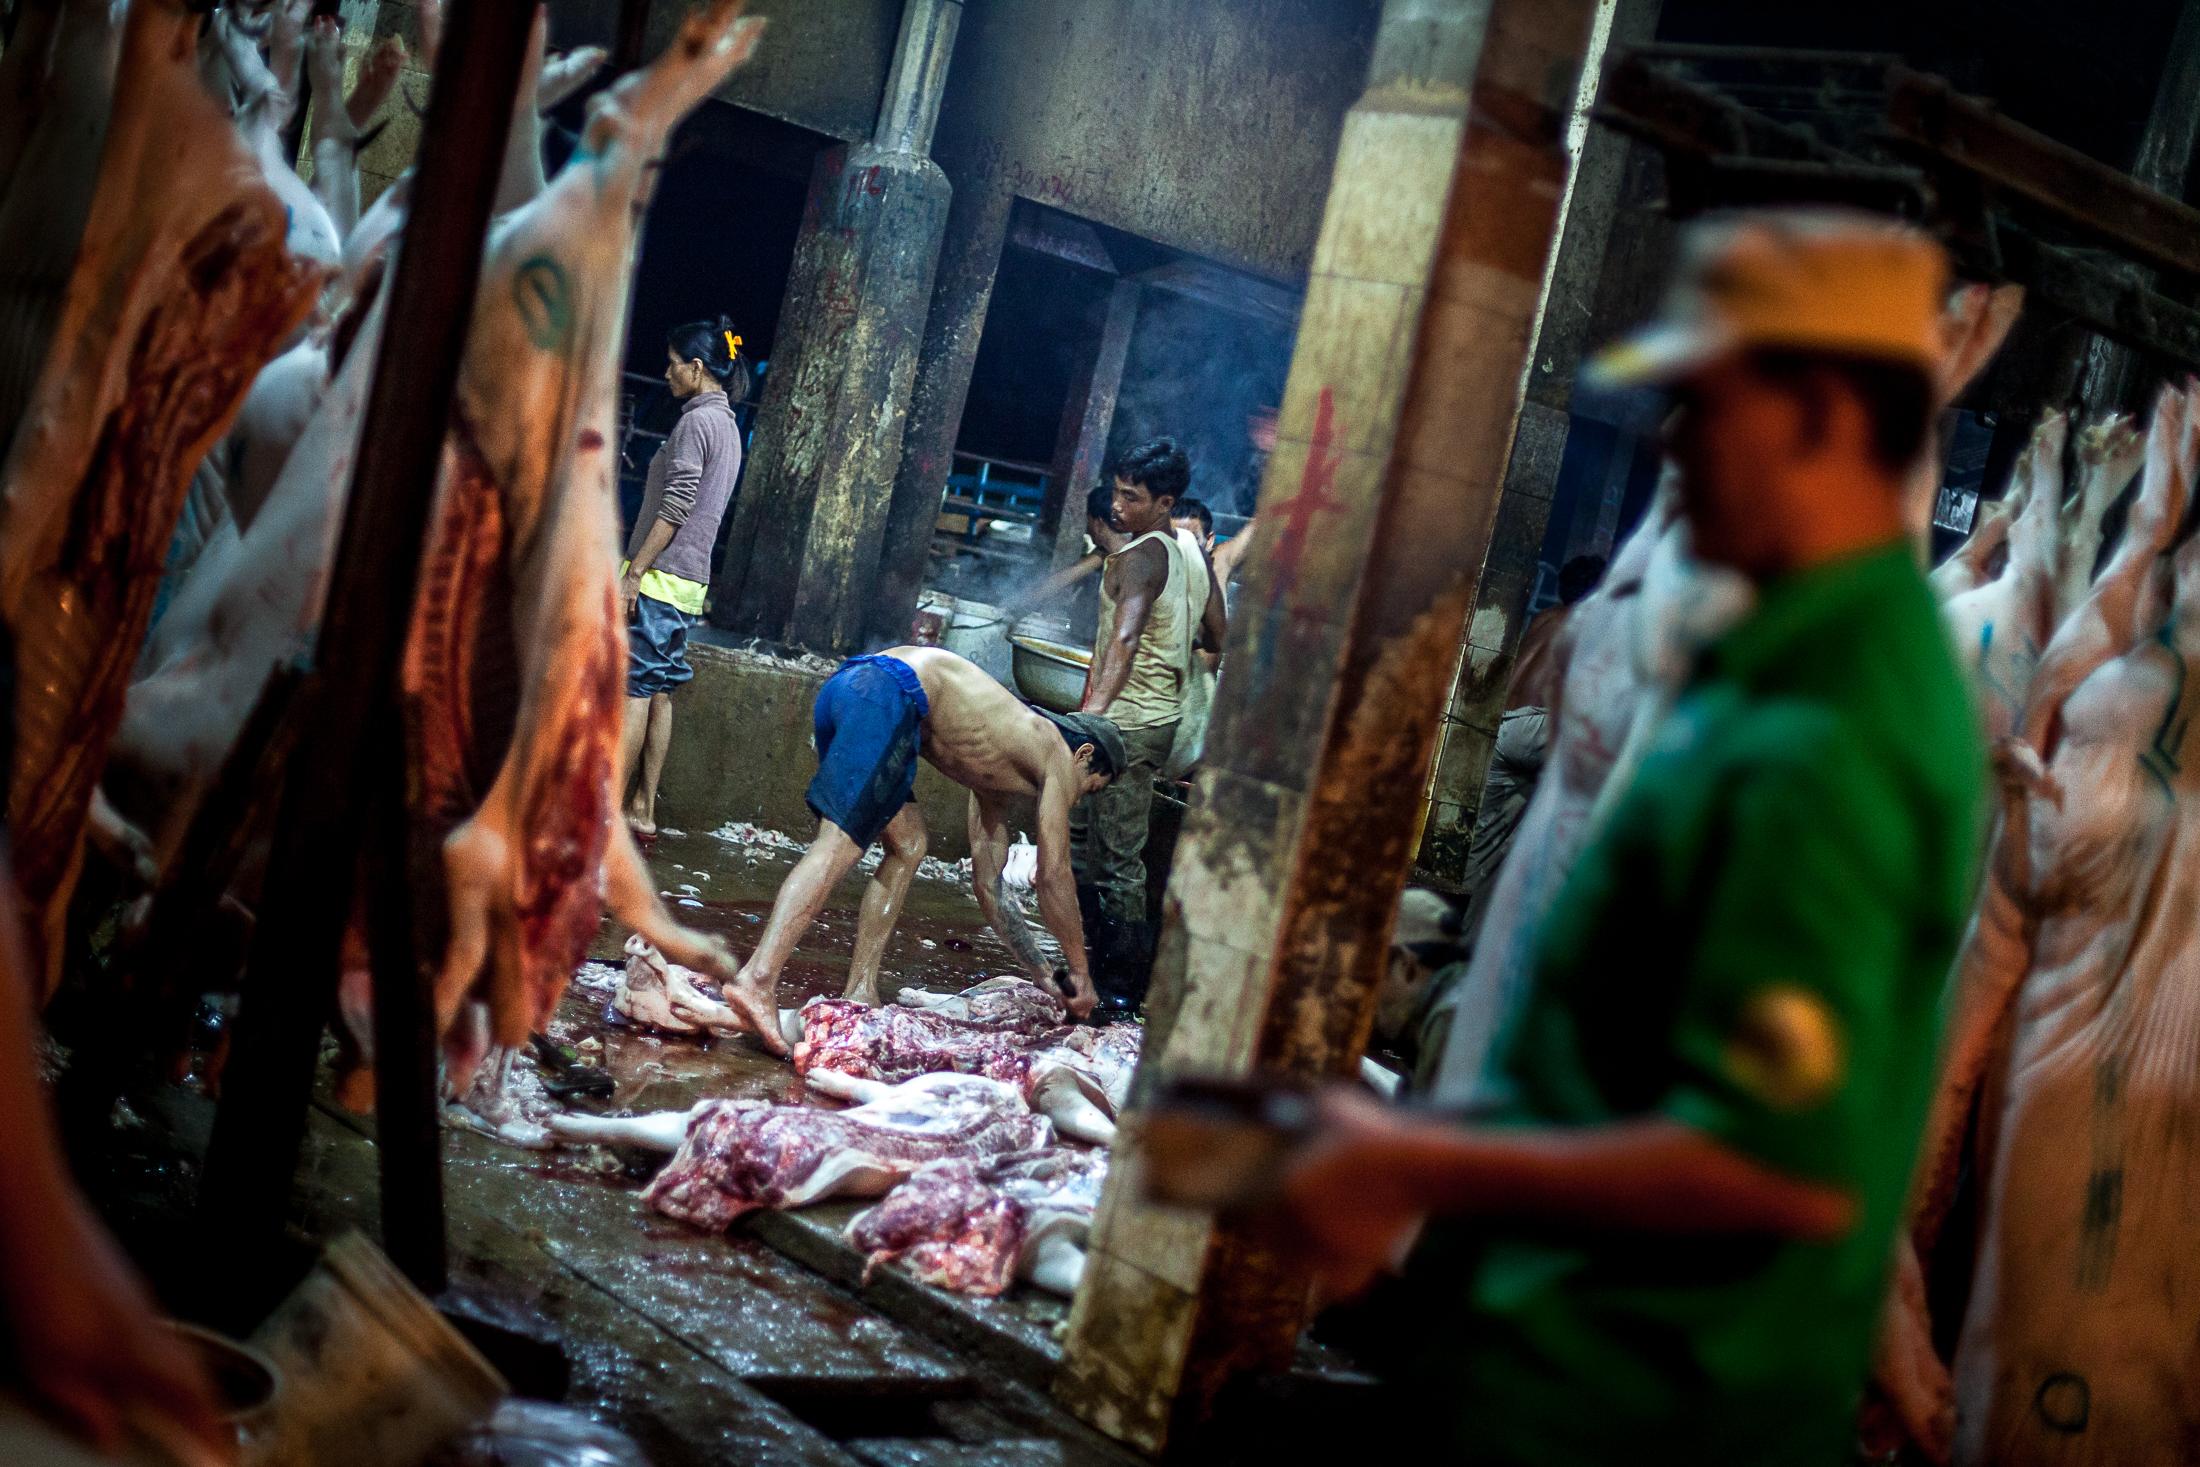 Inside a Cambodian Slaughterhouse - SIEM REAP, CAMBODIA - FEBRUARY 22: A worker removes the...